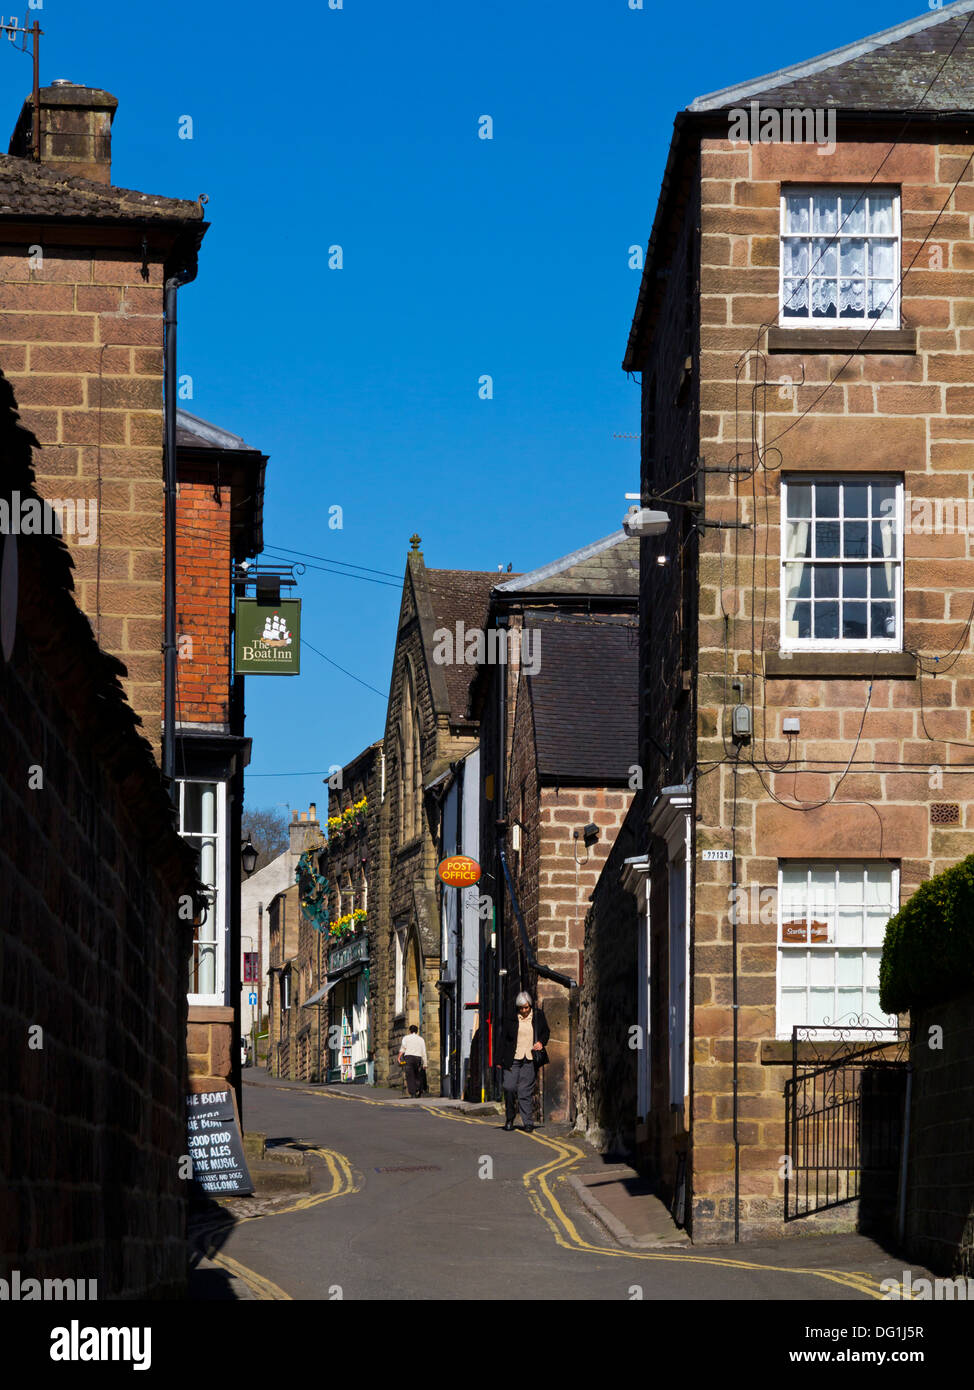 View of lane in Cromford village Derbyshire Dales Peak District England UK looking towards post office and Scarthin Books shop Stock Photo